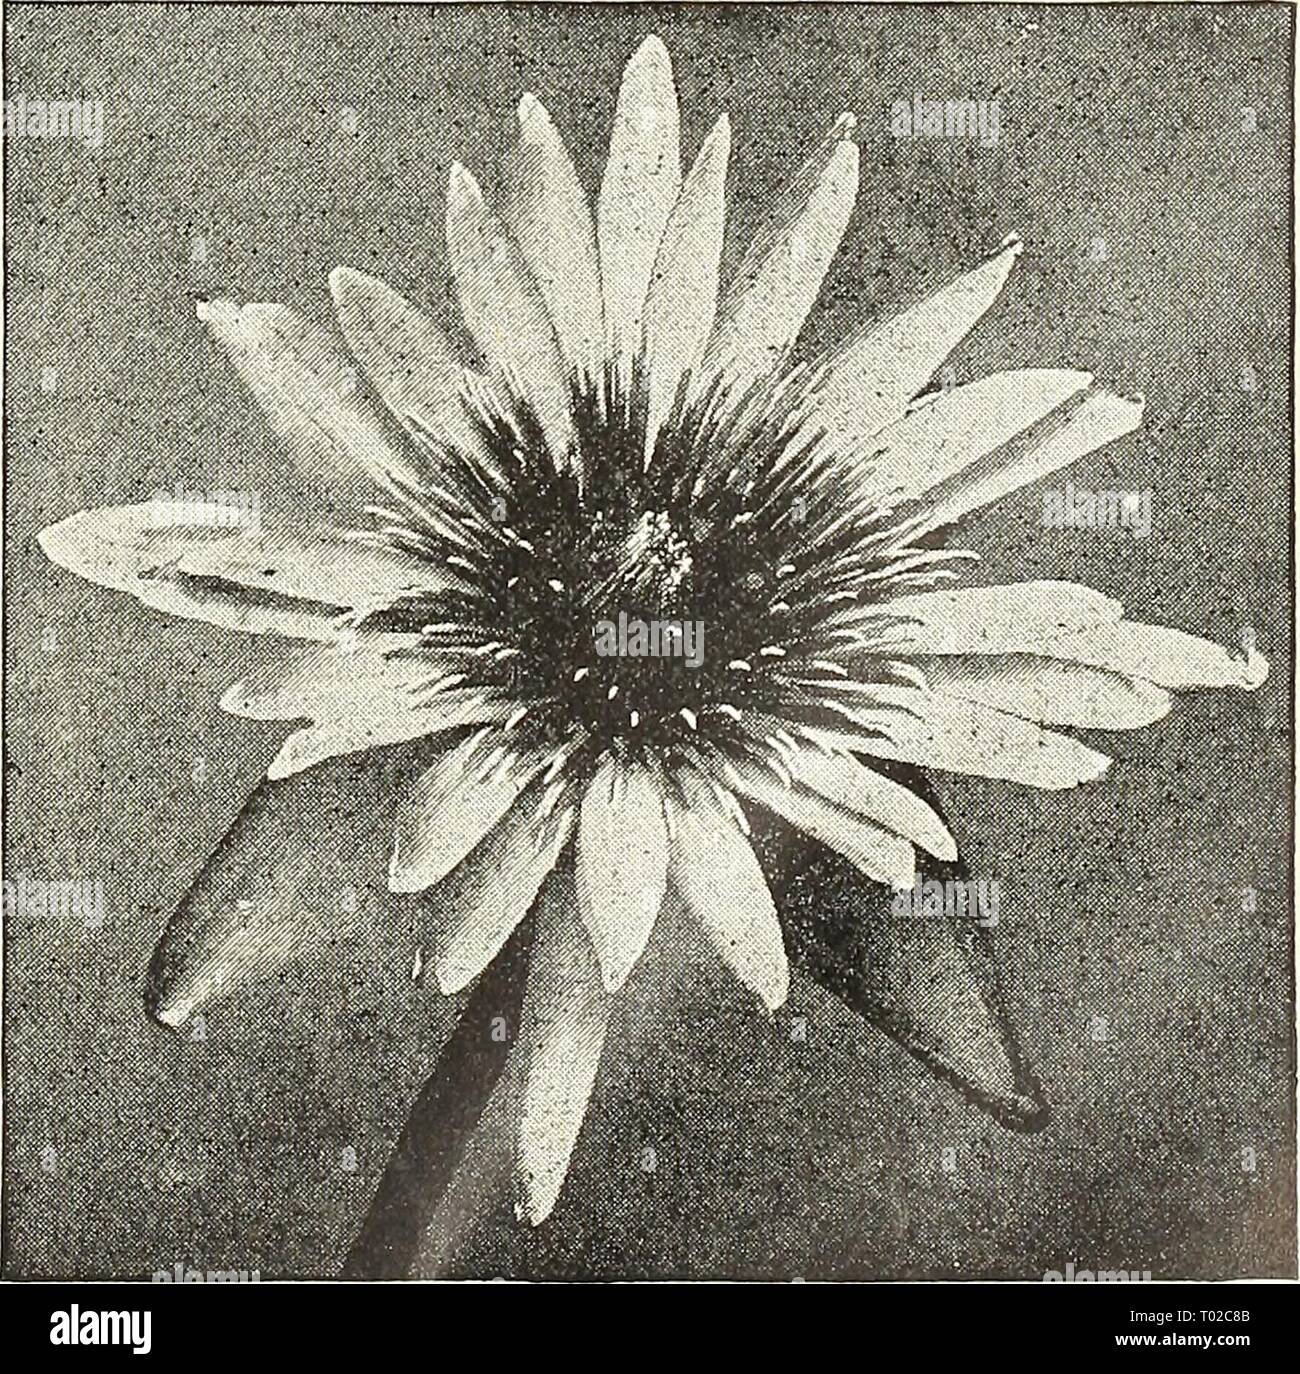 Dreer's garden calendar : 1903 . dreersgardencale1903henr Year: 1903  Tender Day=blooming Water Lilies. Euryale ferox. This was the noblest aquatic plant in cultivation prior to the introduction of the Victoria. The circular leaves are from 2 to 3 feet in diameter, upper side olive-green, curiously puckered and spiny ; the under side a rich purple with prominent spiny veins. Flowers small, deep violet. Plants, $1.50 each. Seeds, 3 seeds for 50 cts.; $2.00 per doz. Nympha^a capensis—Thunb. (syn. N. scutifolia, D. C; N. Carulea, B. M. 552, and American Gardens). Cape Blue Water Lily ; flowers ri Stock Photo